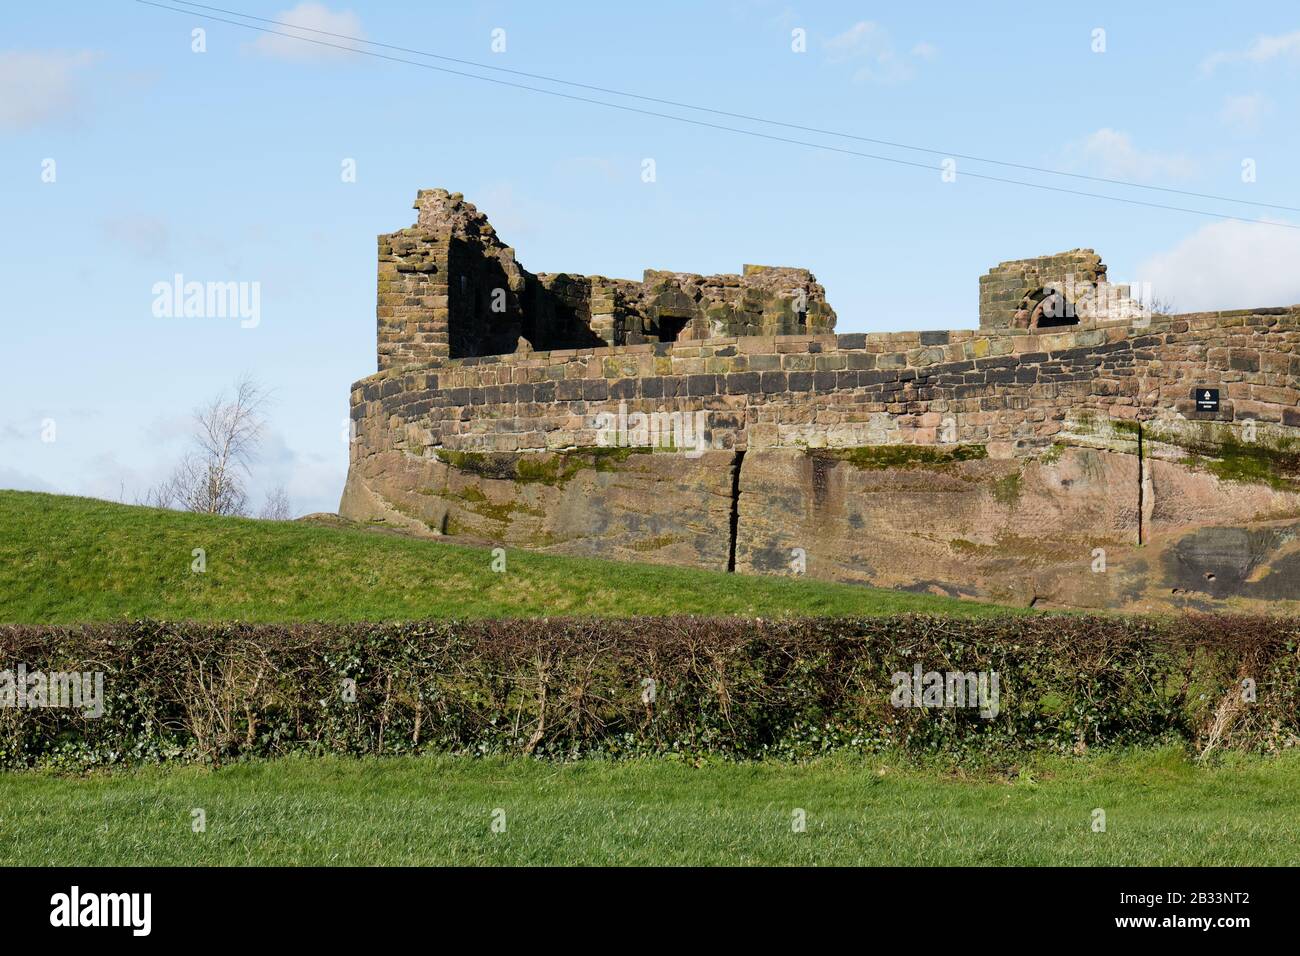 The ruins of Halton Castle in Runcorn in Cheshire, England are built on a sandstone outcrop, with views of Runcorn, Widnes and the surrounding area Stock Photo